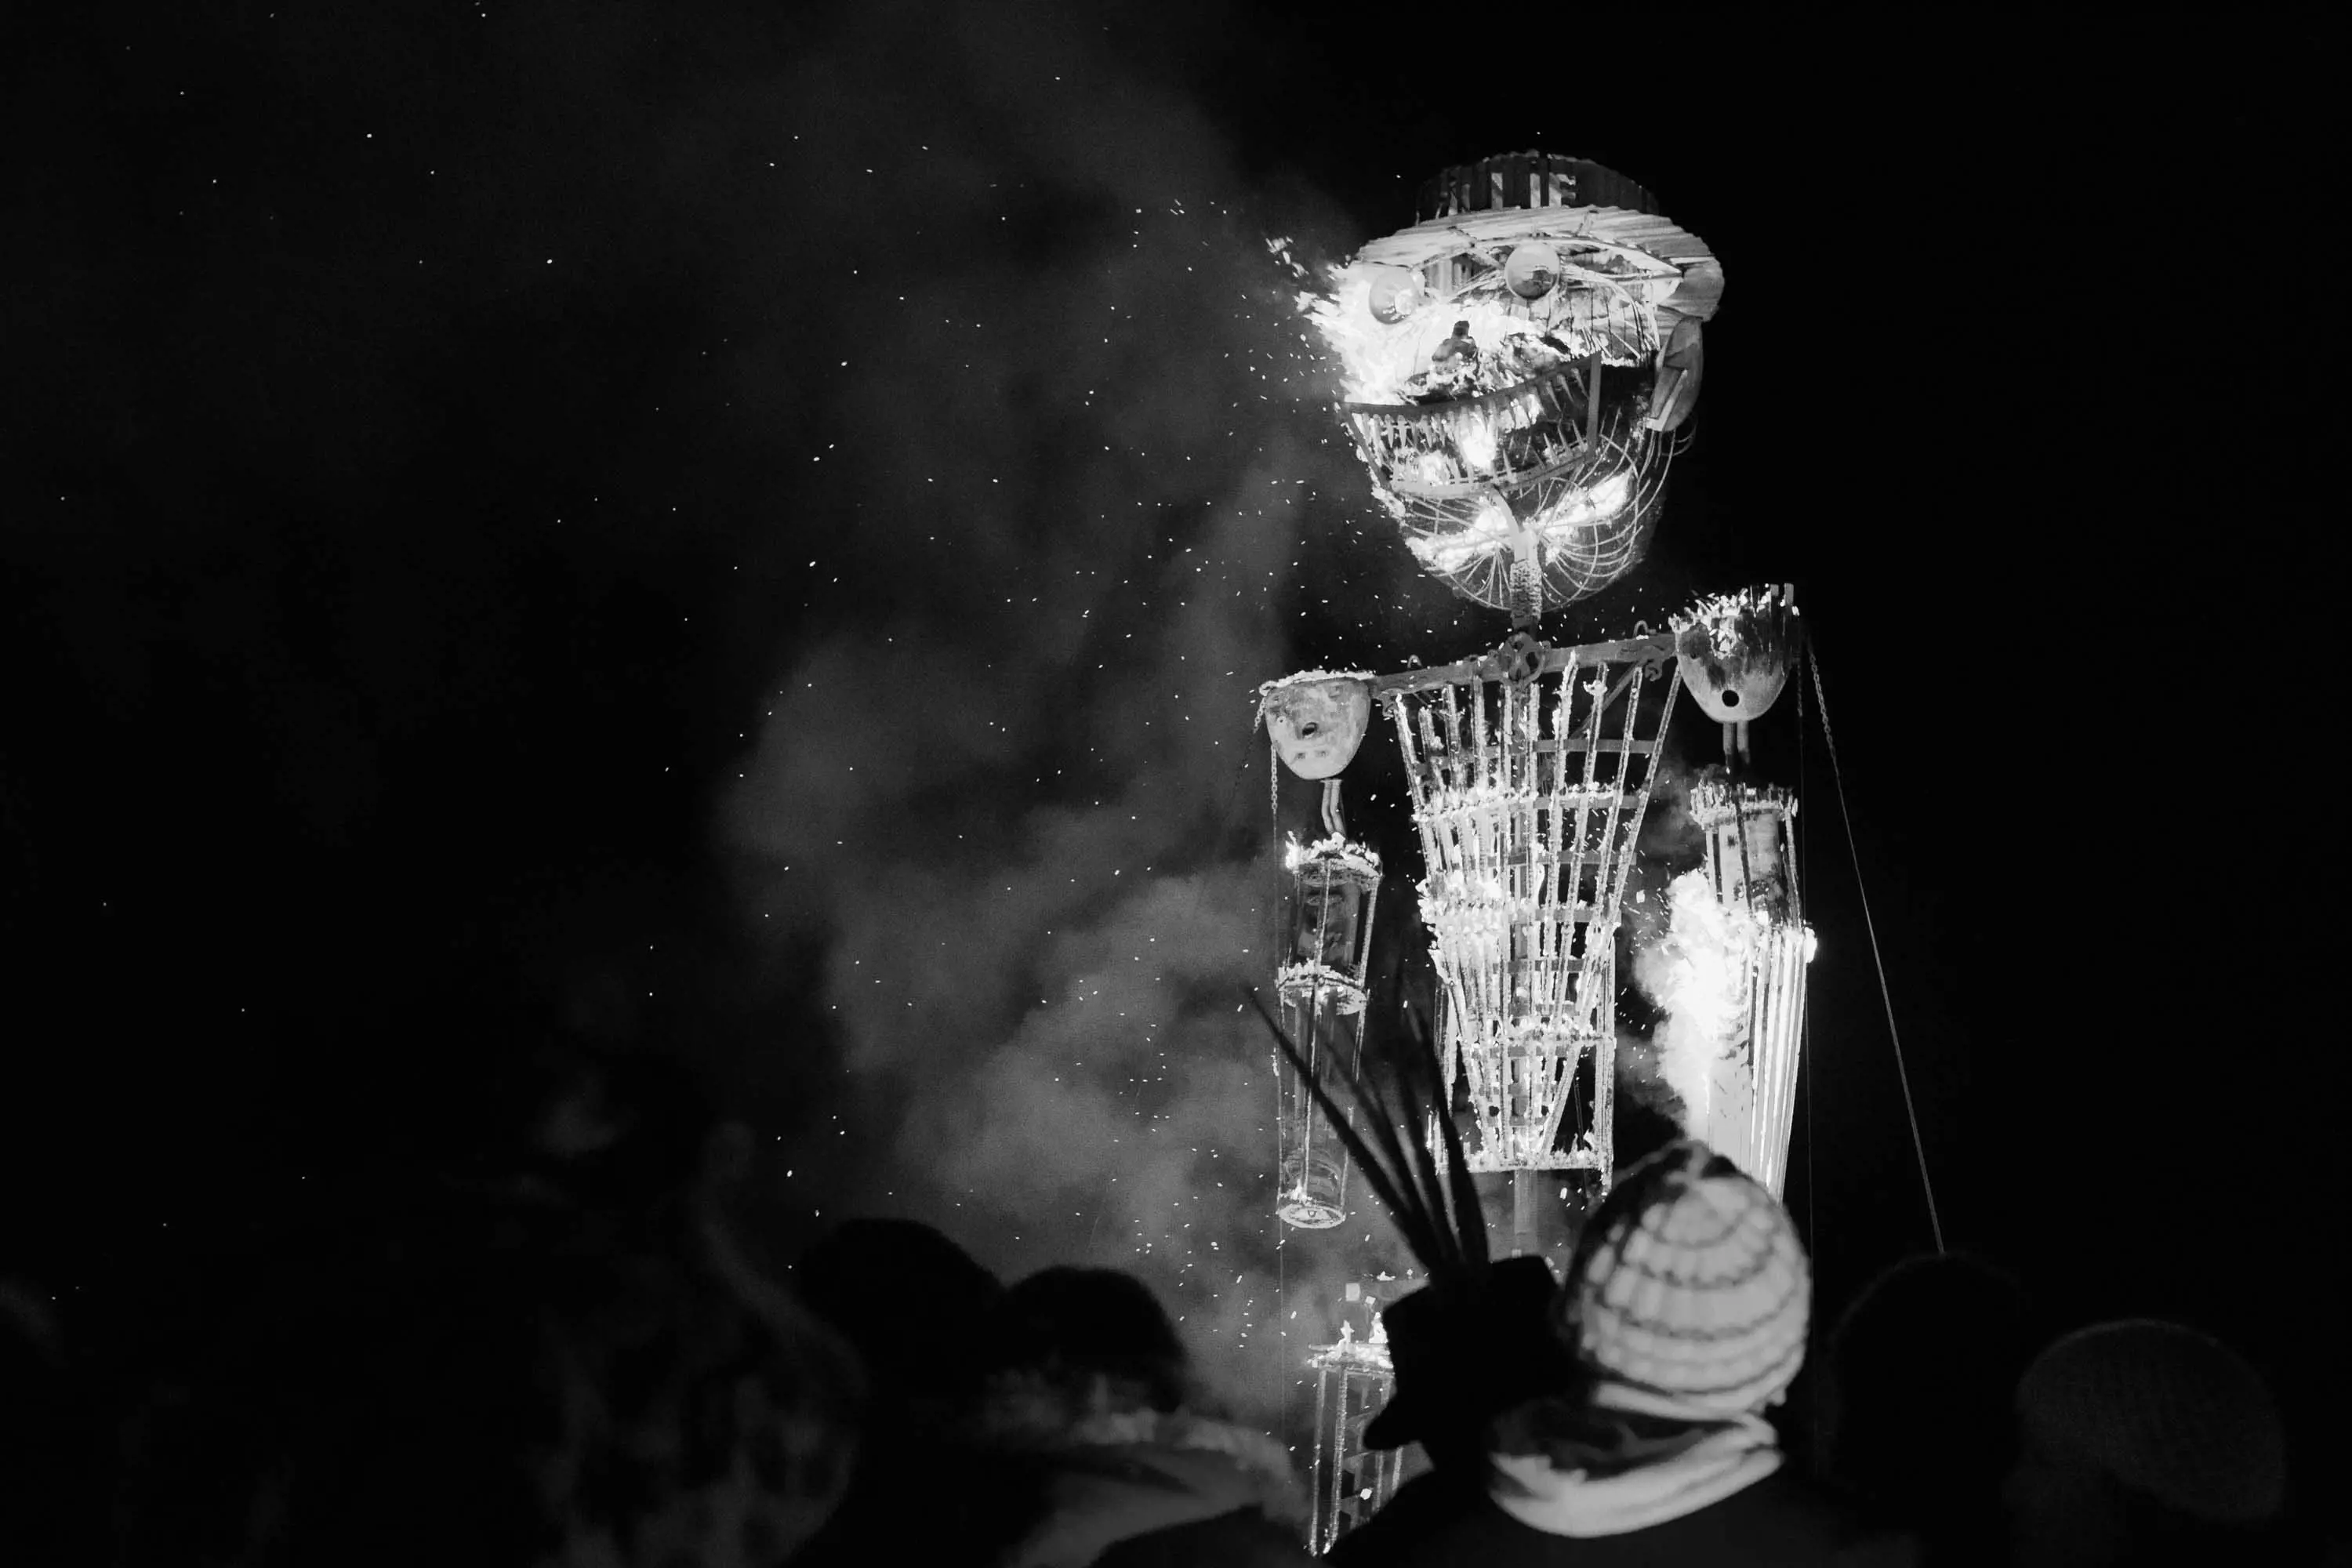 A enormous effigy of a man with a large grin and a rimmed hat made of wood and steel, burns against the night sky.